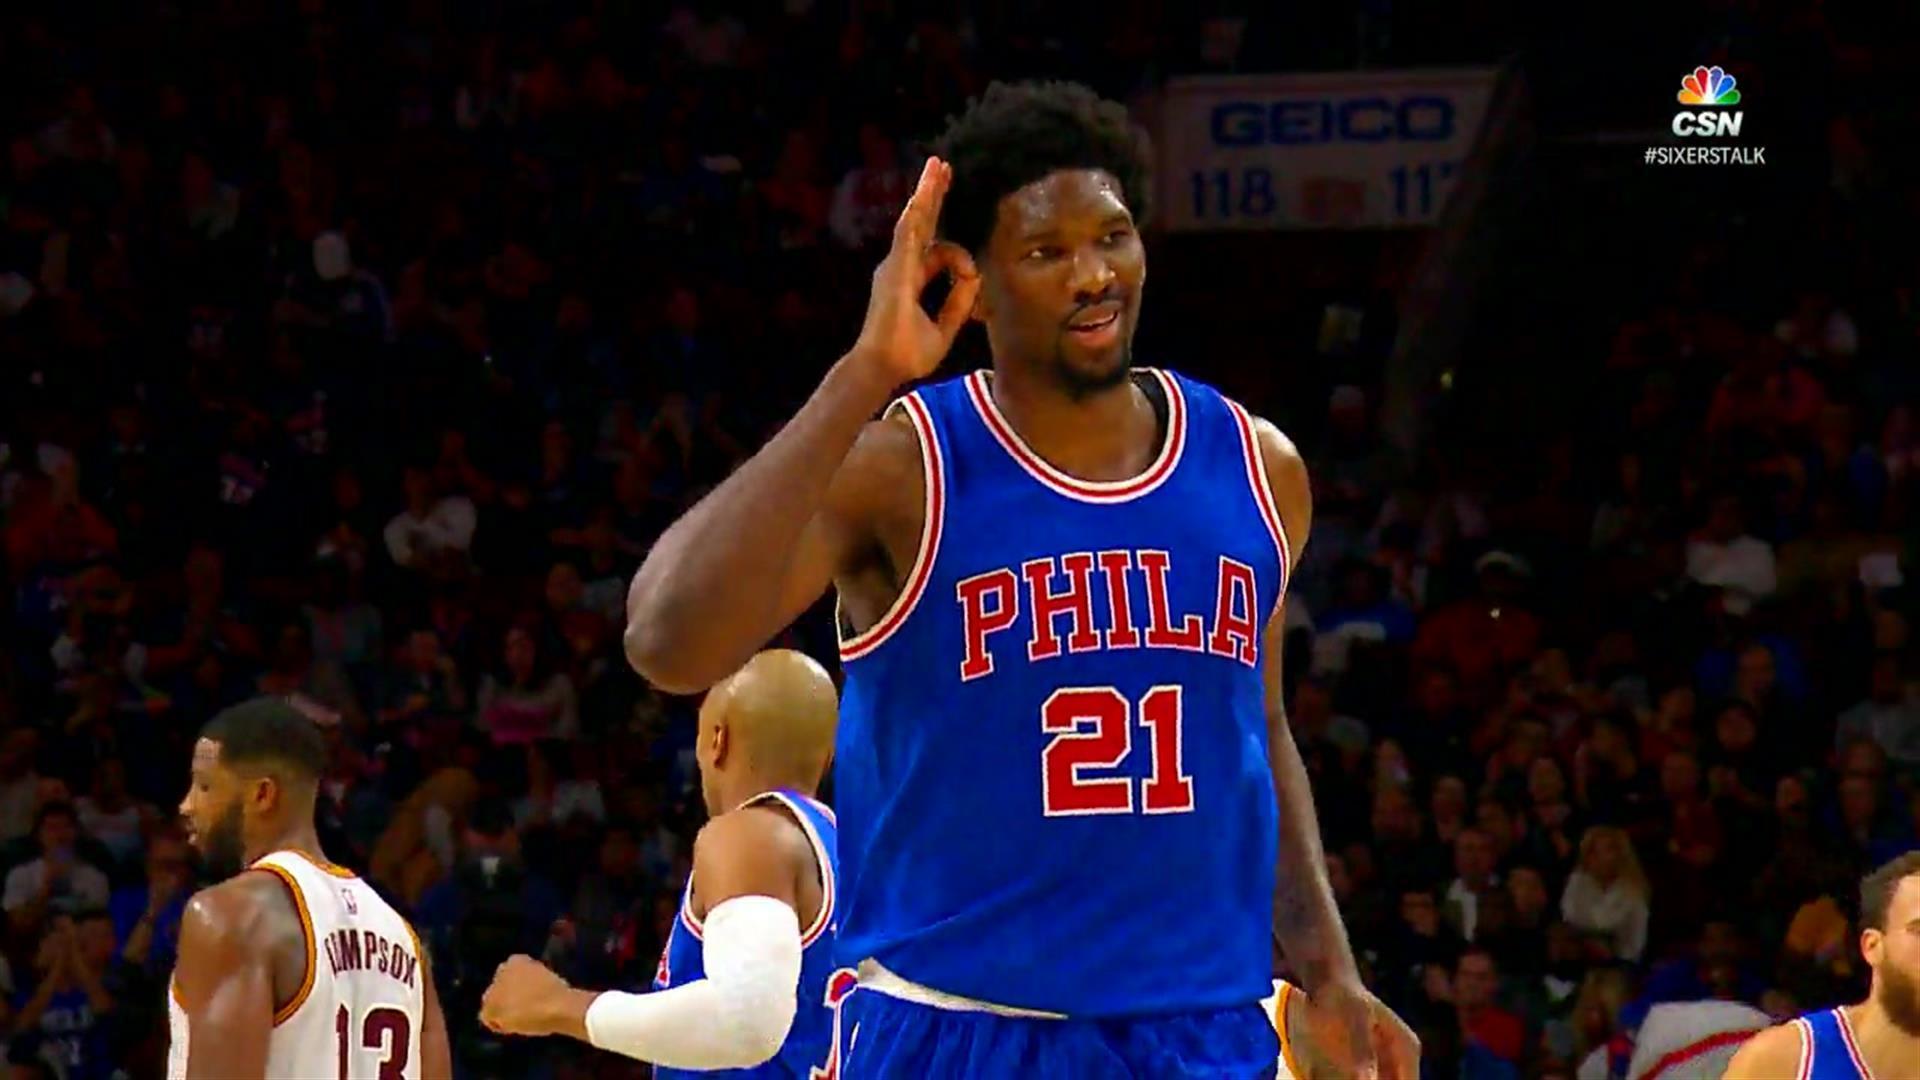 Joel Embiid Feature Highlight: Career High 22 Points Vs. Cavs